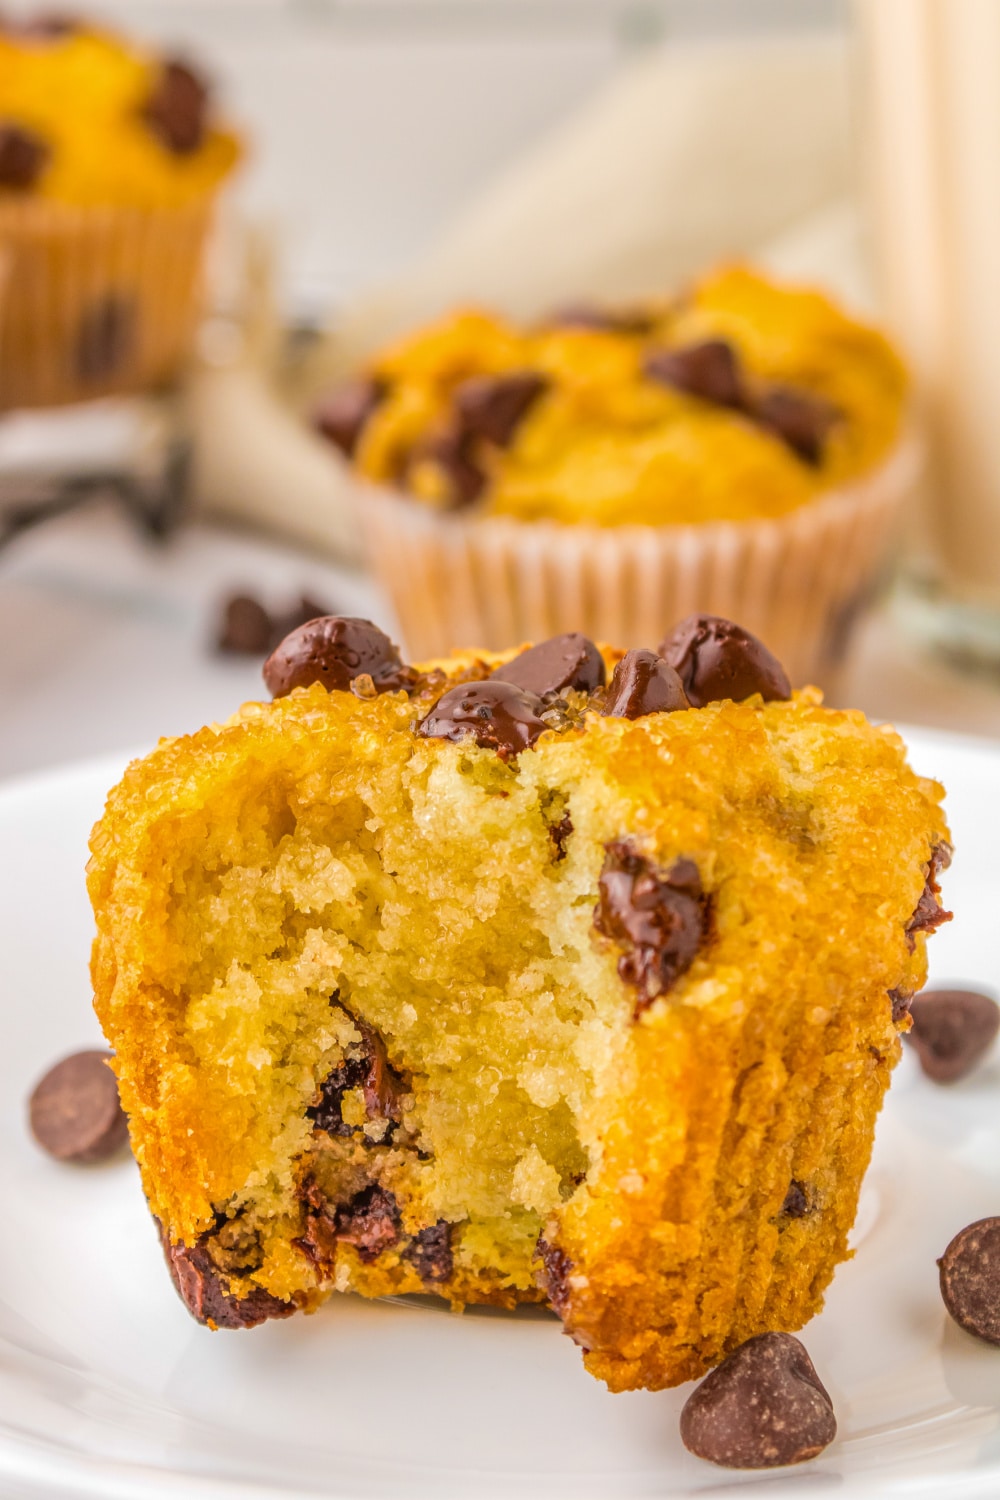 A chocolate chip muffin with missing bite on a white plate.